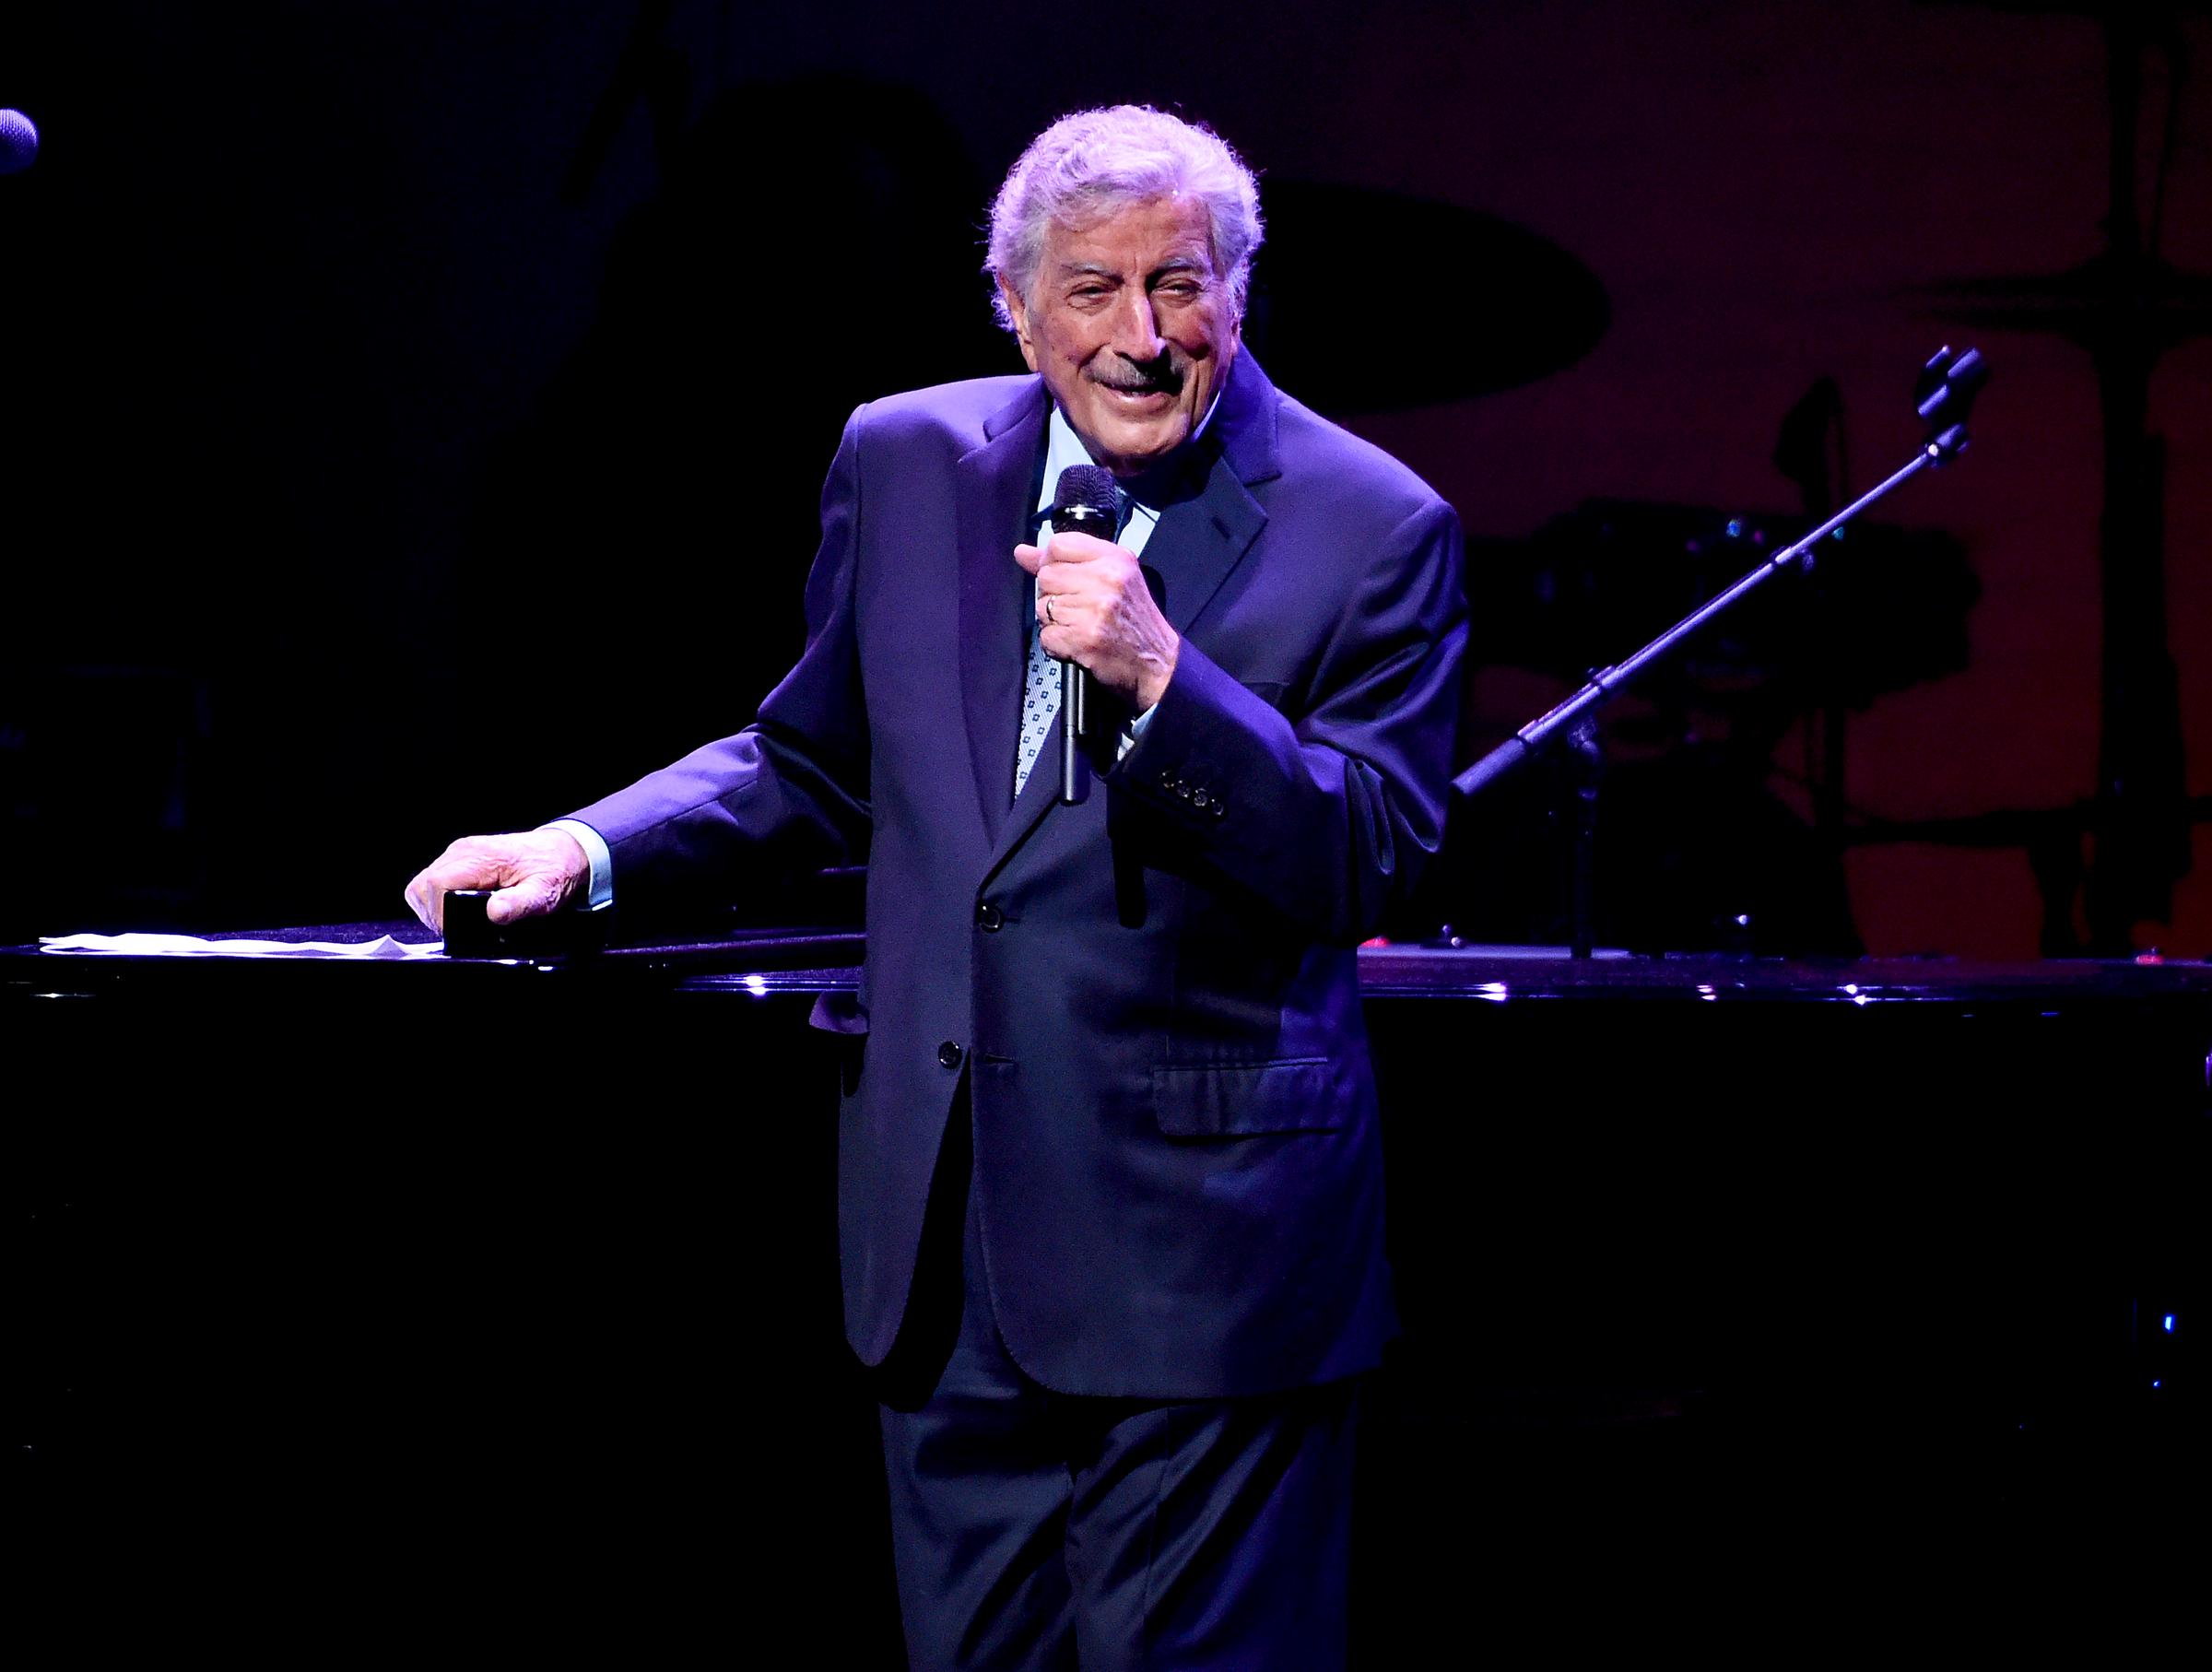 Tony Bennett performing during the 17th Annual A Great Night In Harlem on April 4, 2019, in New York City. | Source: Getty Images